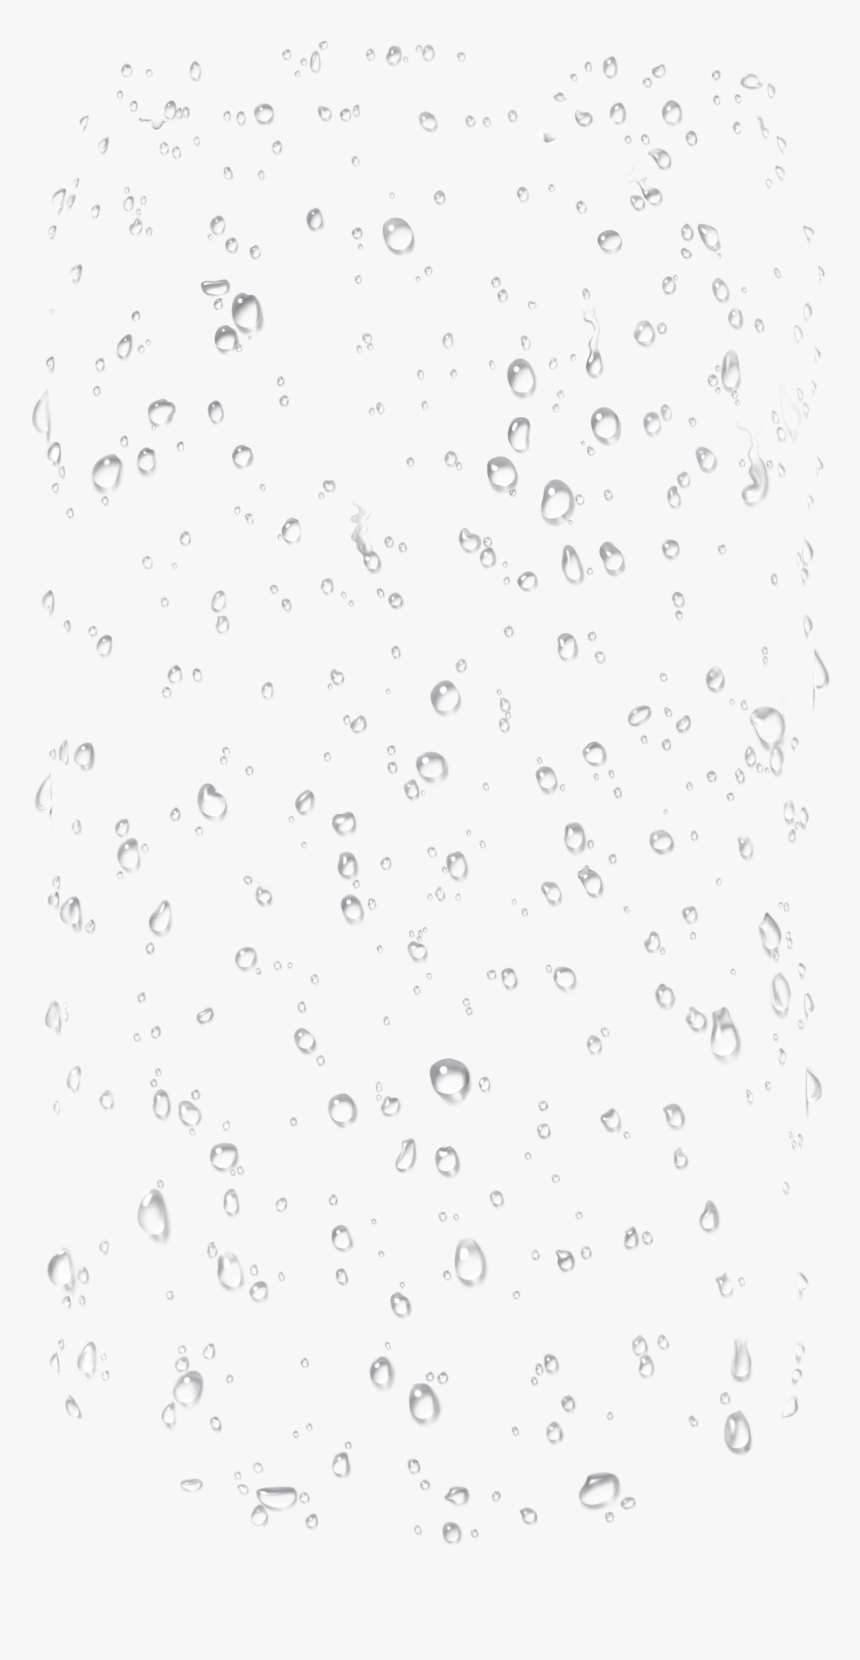 Drops Of Water Png - Water Fall Drops Png, Transparent Png, Free Download